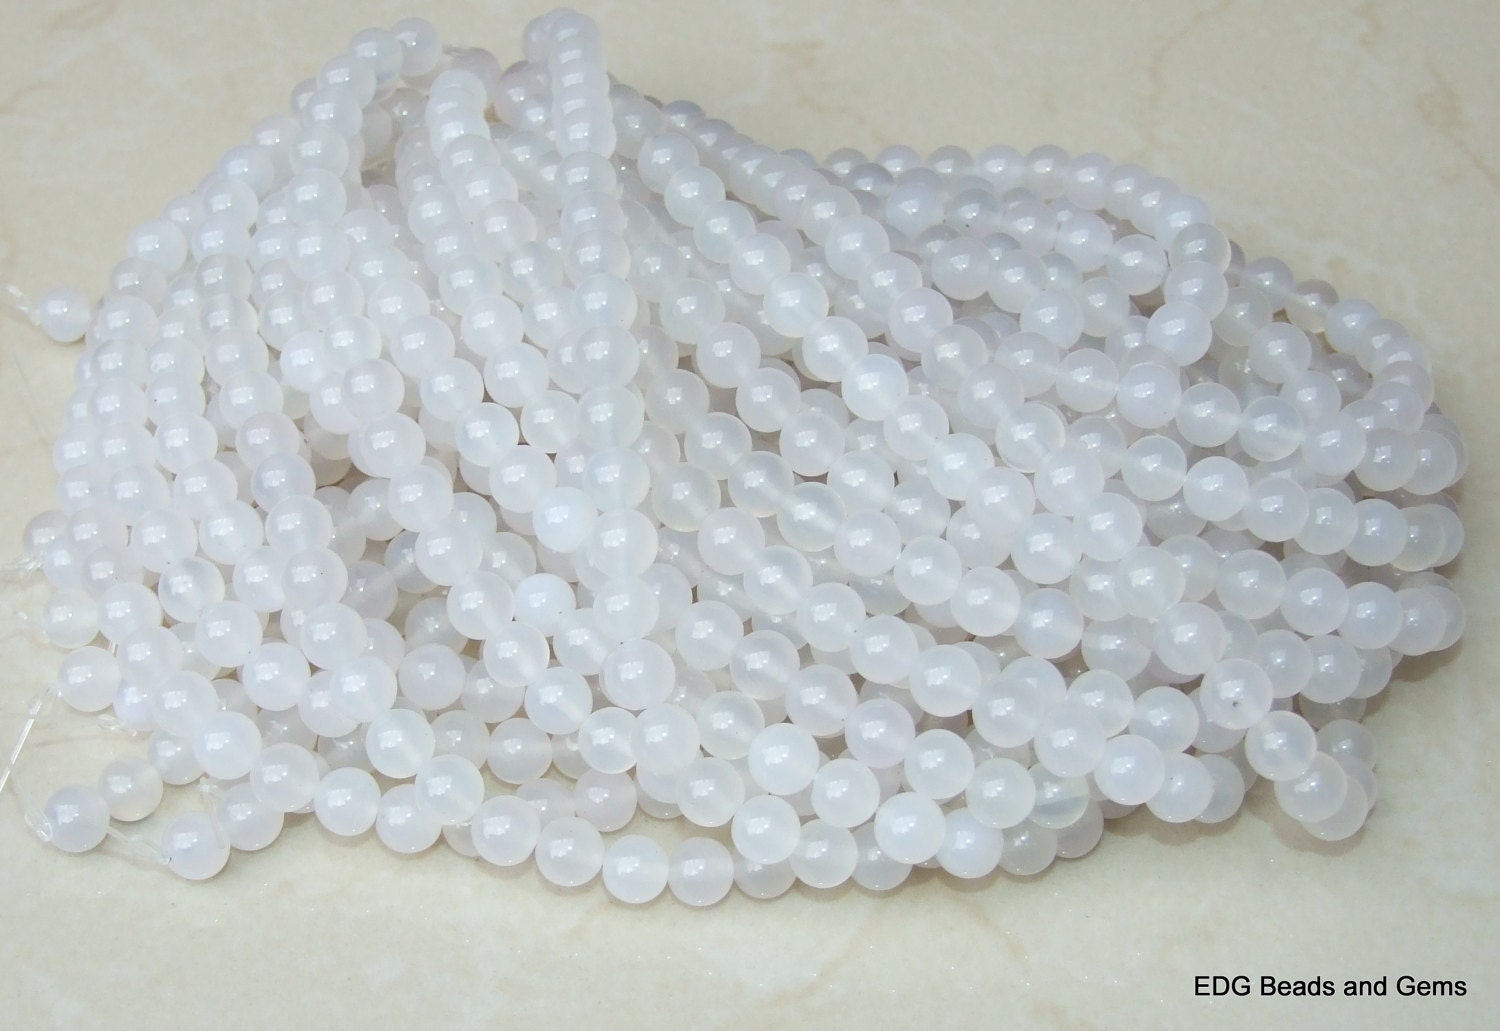 White Agate Beads - 6mm and 8mm - Round Polished Agate Beads - Gemstone Beads - Jewelry Beads - 15 inch Strand